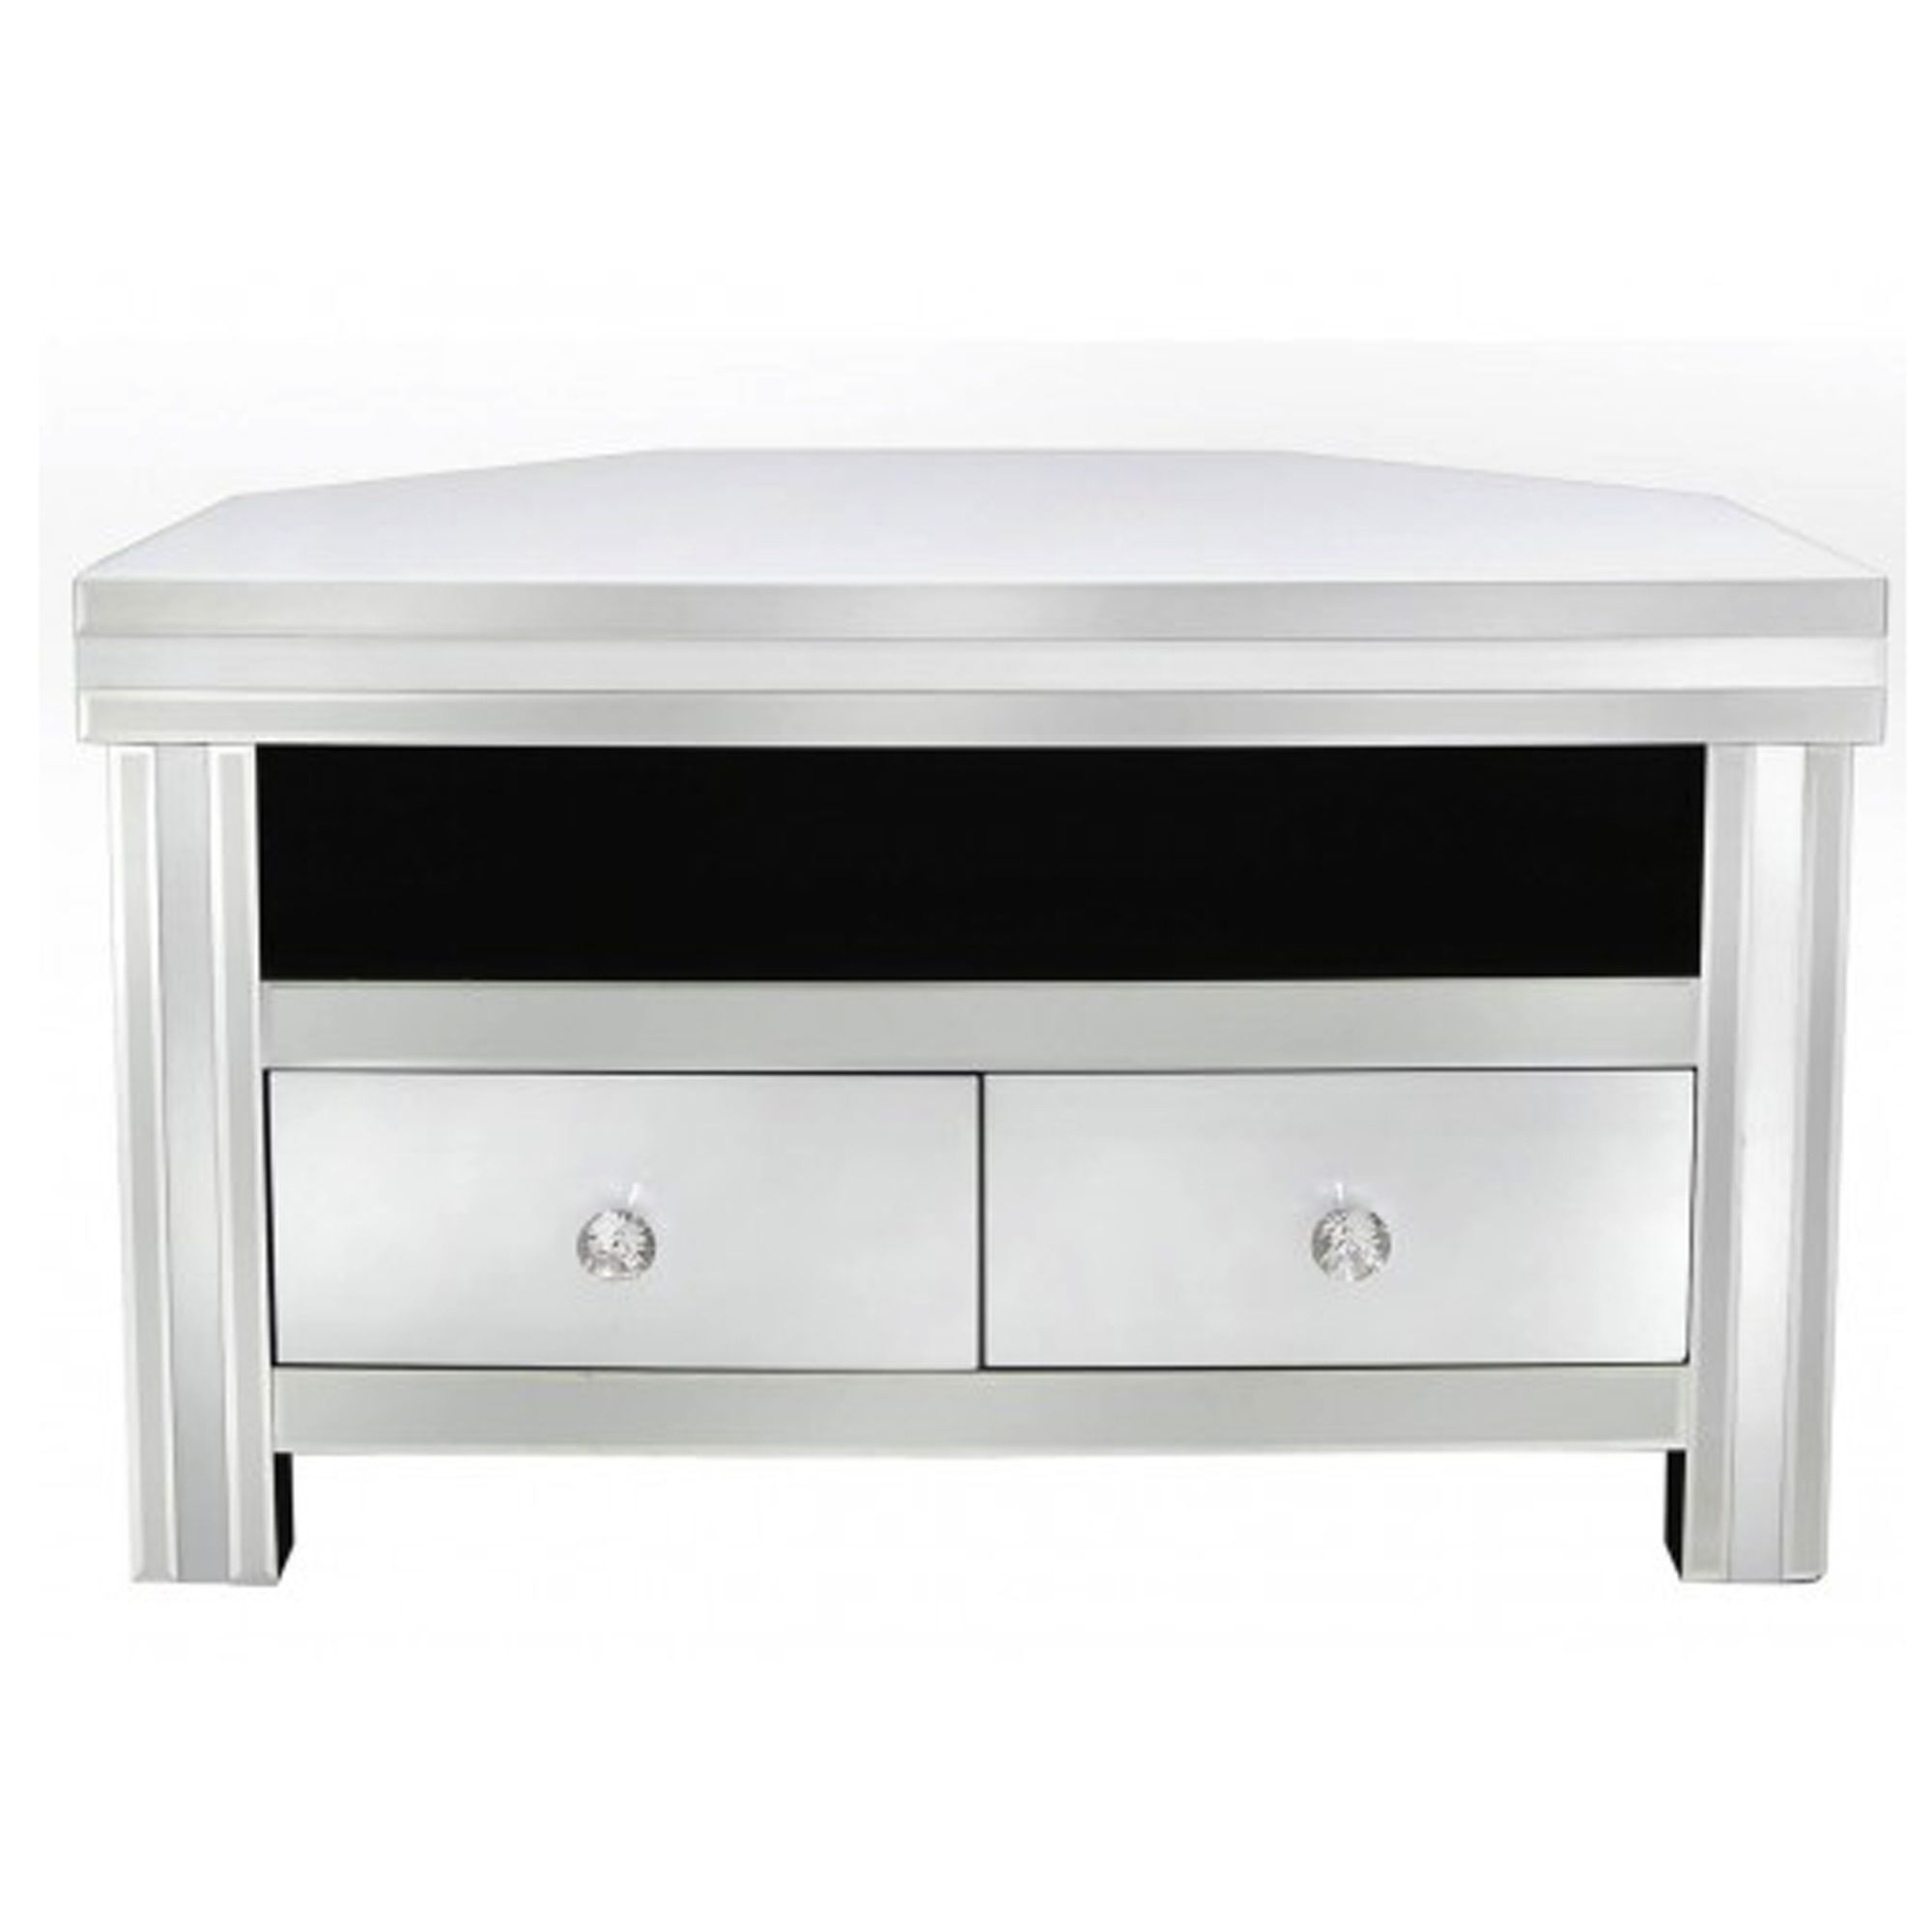 Alghero White Mirrored Corner Tv Unit | Tv Stands Intended For Tv Stands Corner Units (View 5 of 15)